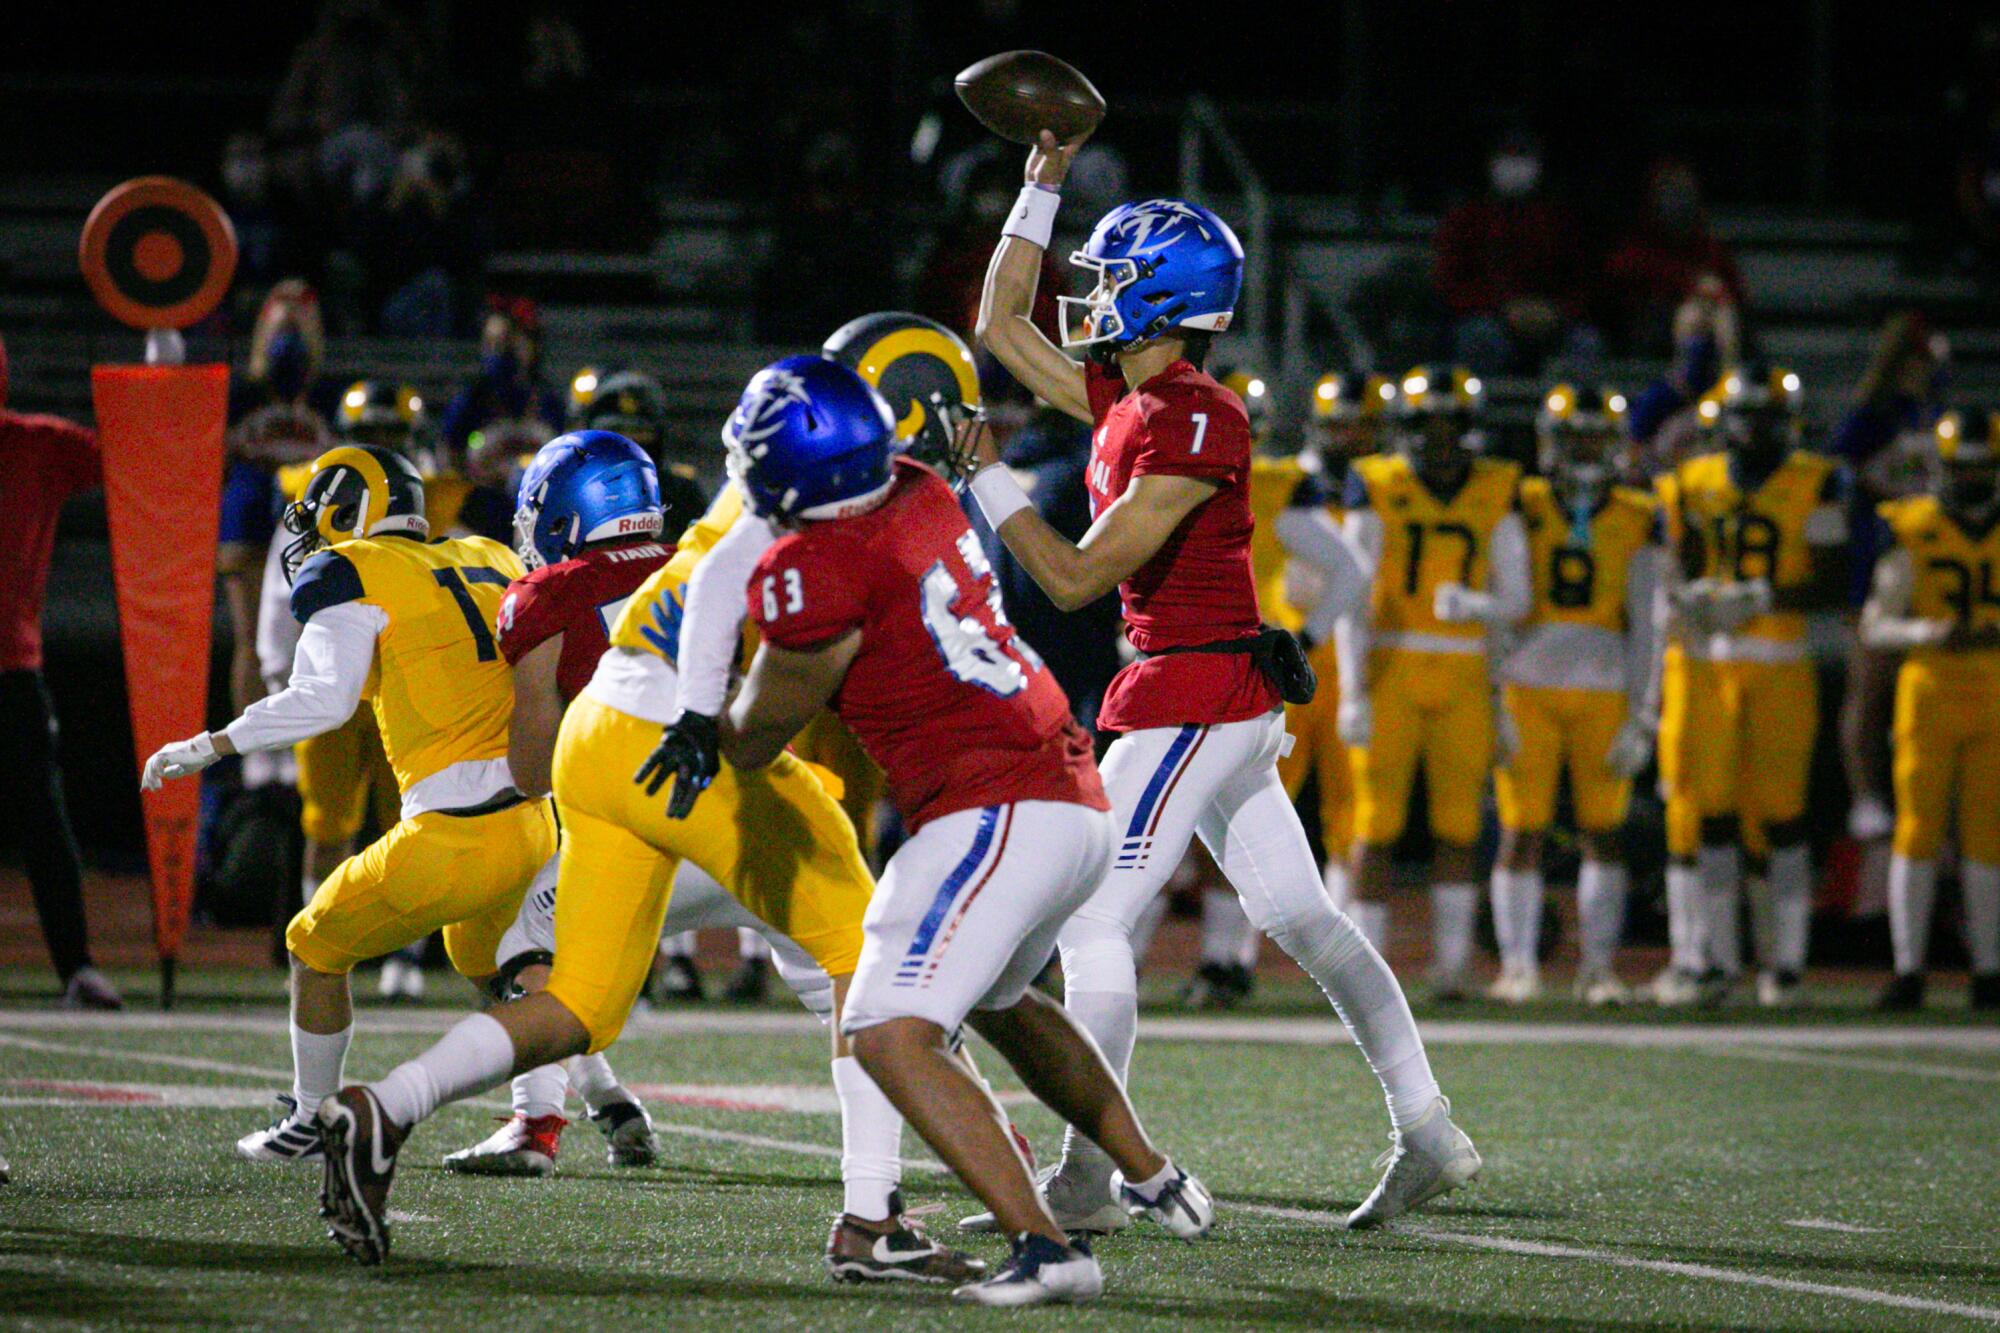 Los Alamitos quarterback Malachi Nelson passes while surrounded by Millikan players.